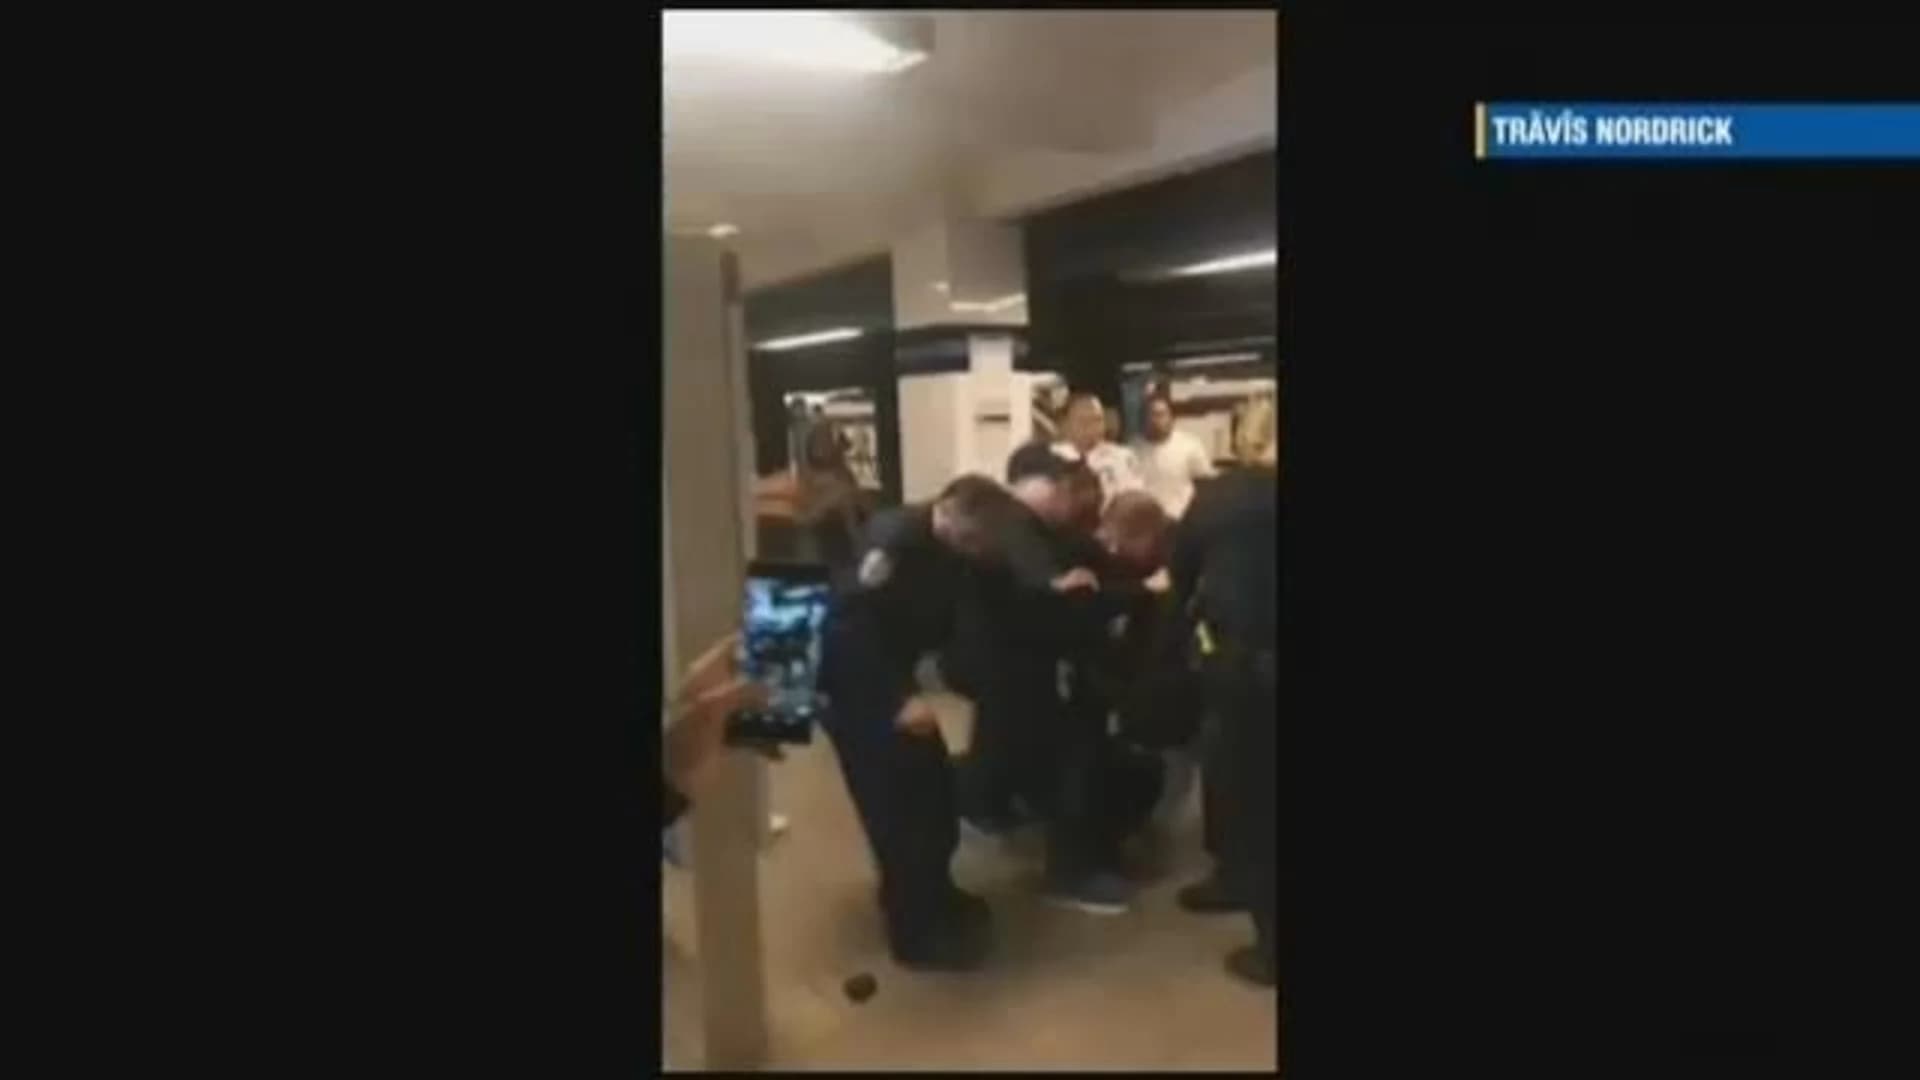 Teen files lawsuit against city, NYPD over brawl at Jay Street-MetroTech station